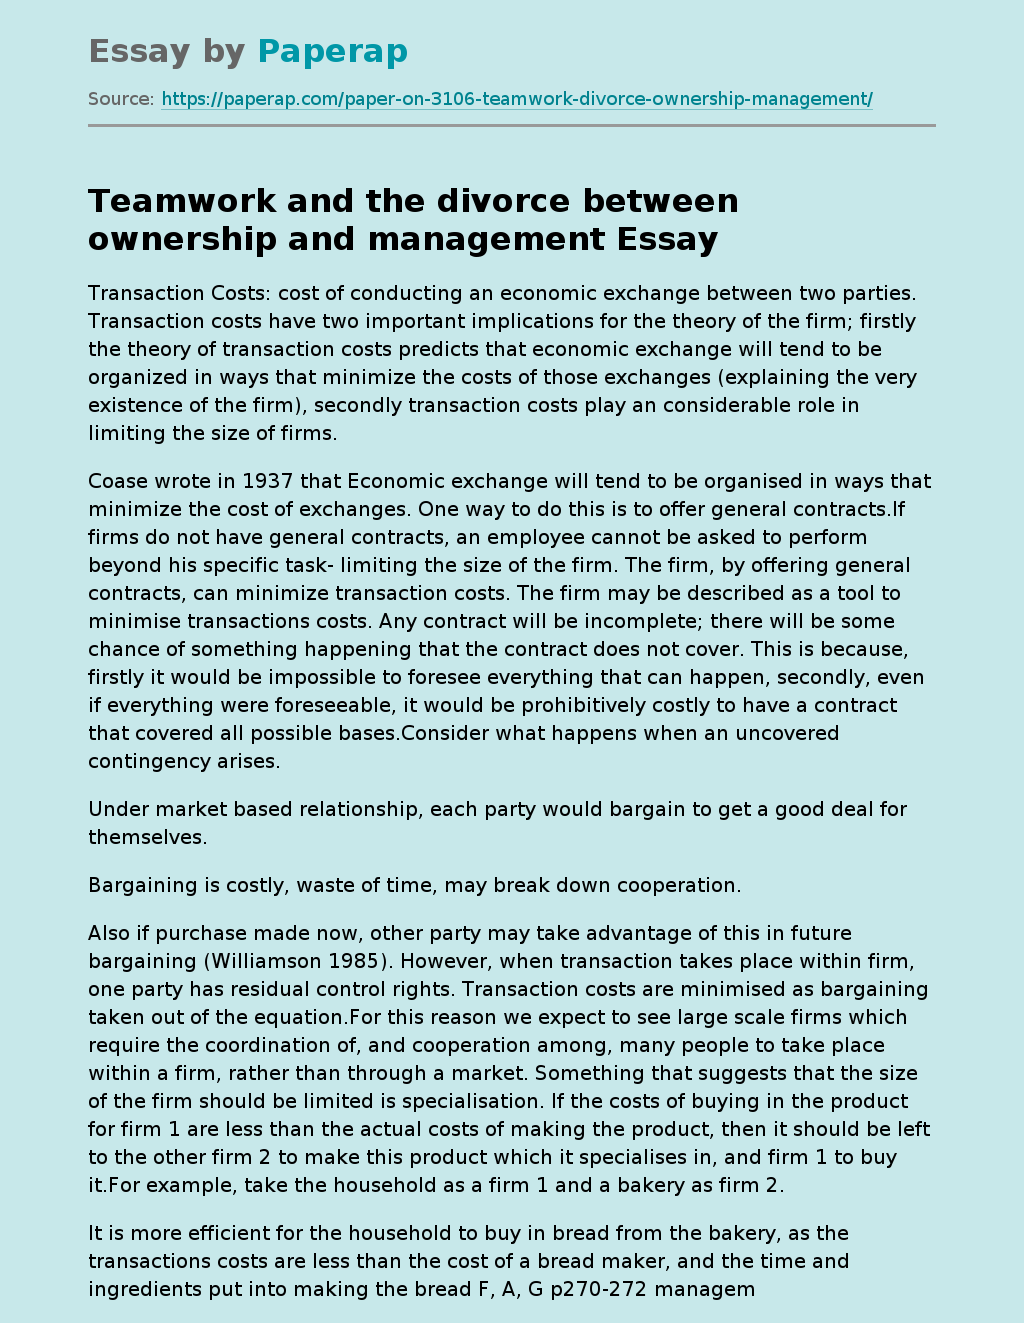 Teamwork and the divorce between ownership and management